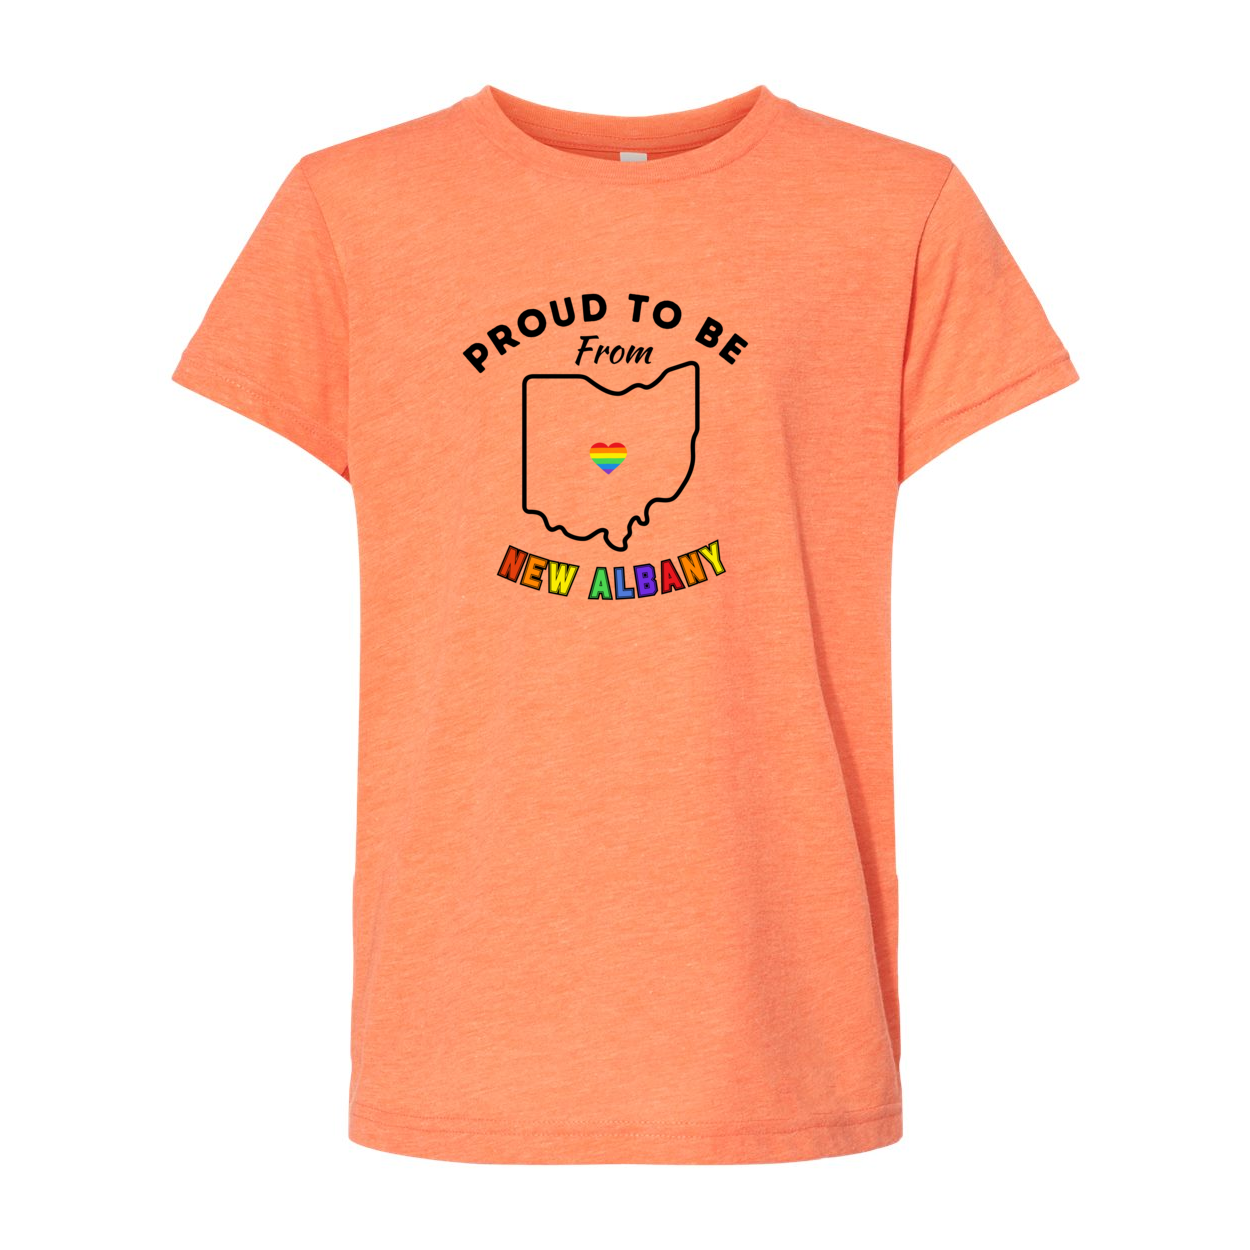 Youth City Rainbow Pride Super Soft Short Sleeve Graphic Tee - New Albany